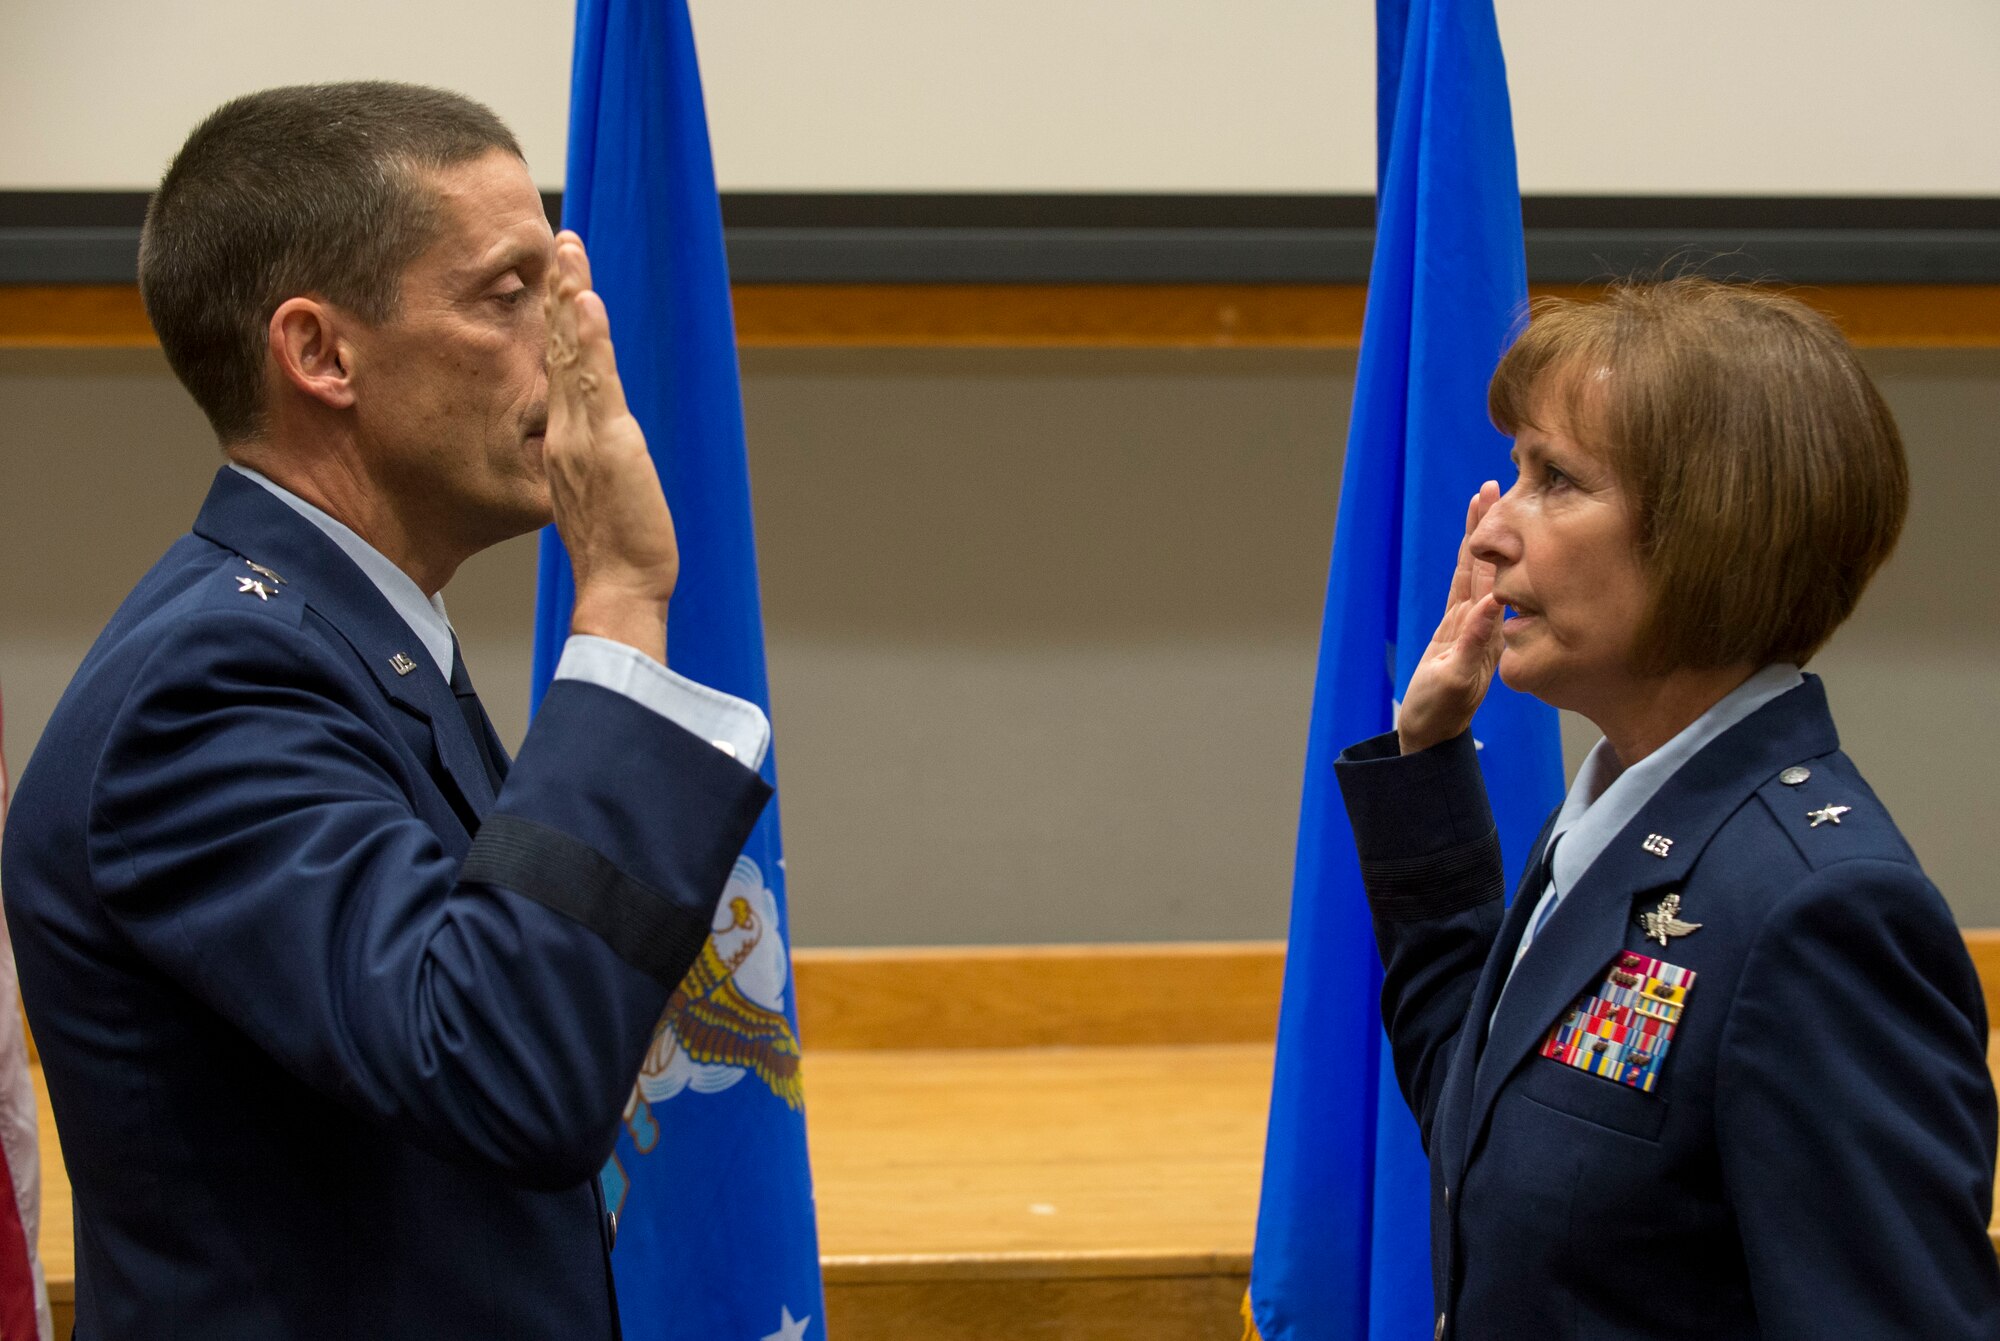 Maj. Gen. Robert Skinner, Air Forces Cyber commander, administers the Oath of Office to Brig. Gen. Michelle Hayworth, AFCYBER vice commander, during her promotion ceremony at Joint Base San Antonio-Lackland, Texas, July, 16, 2018. In June, Hayworth re-joined AFCYBER from Air Force Space Command. She previously served in AFCYBER, most recently as the 688th Cyberspace Wing Commander. (U.S. Air Force photo by Tech. Sgt. R.J. Biermann)